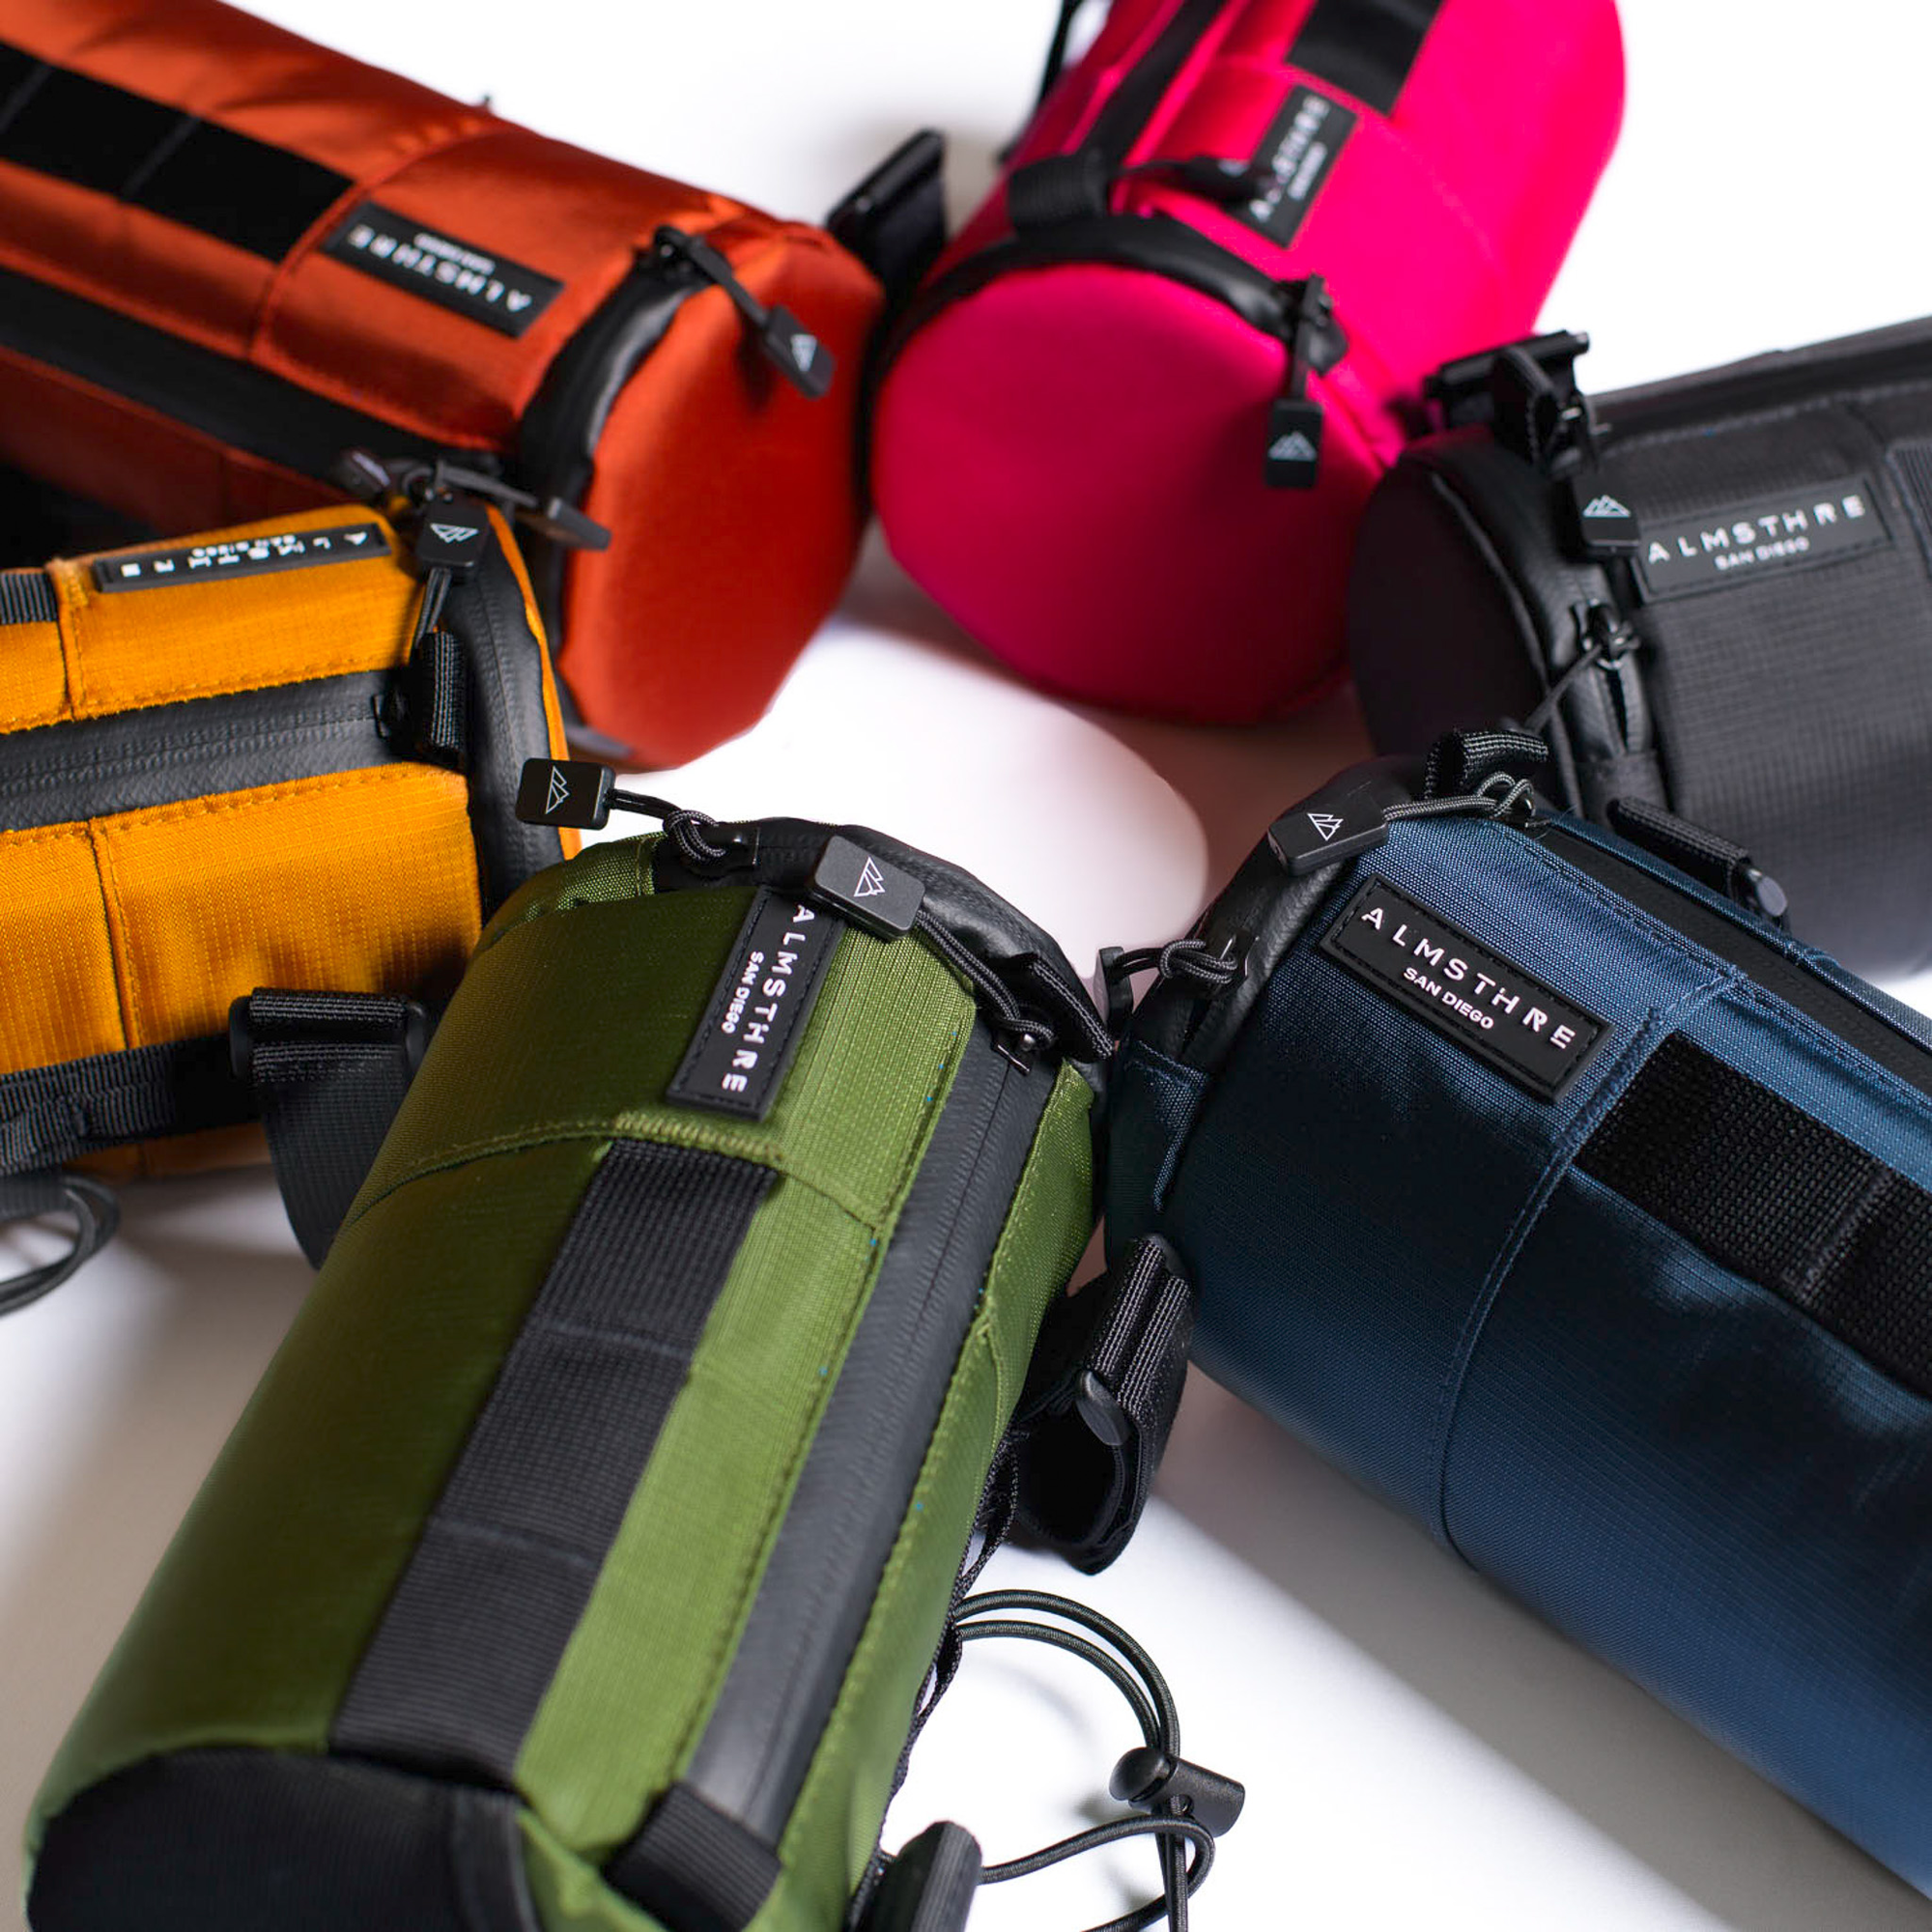 Bike bags built for all day adventures